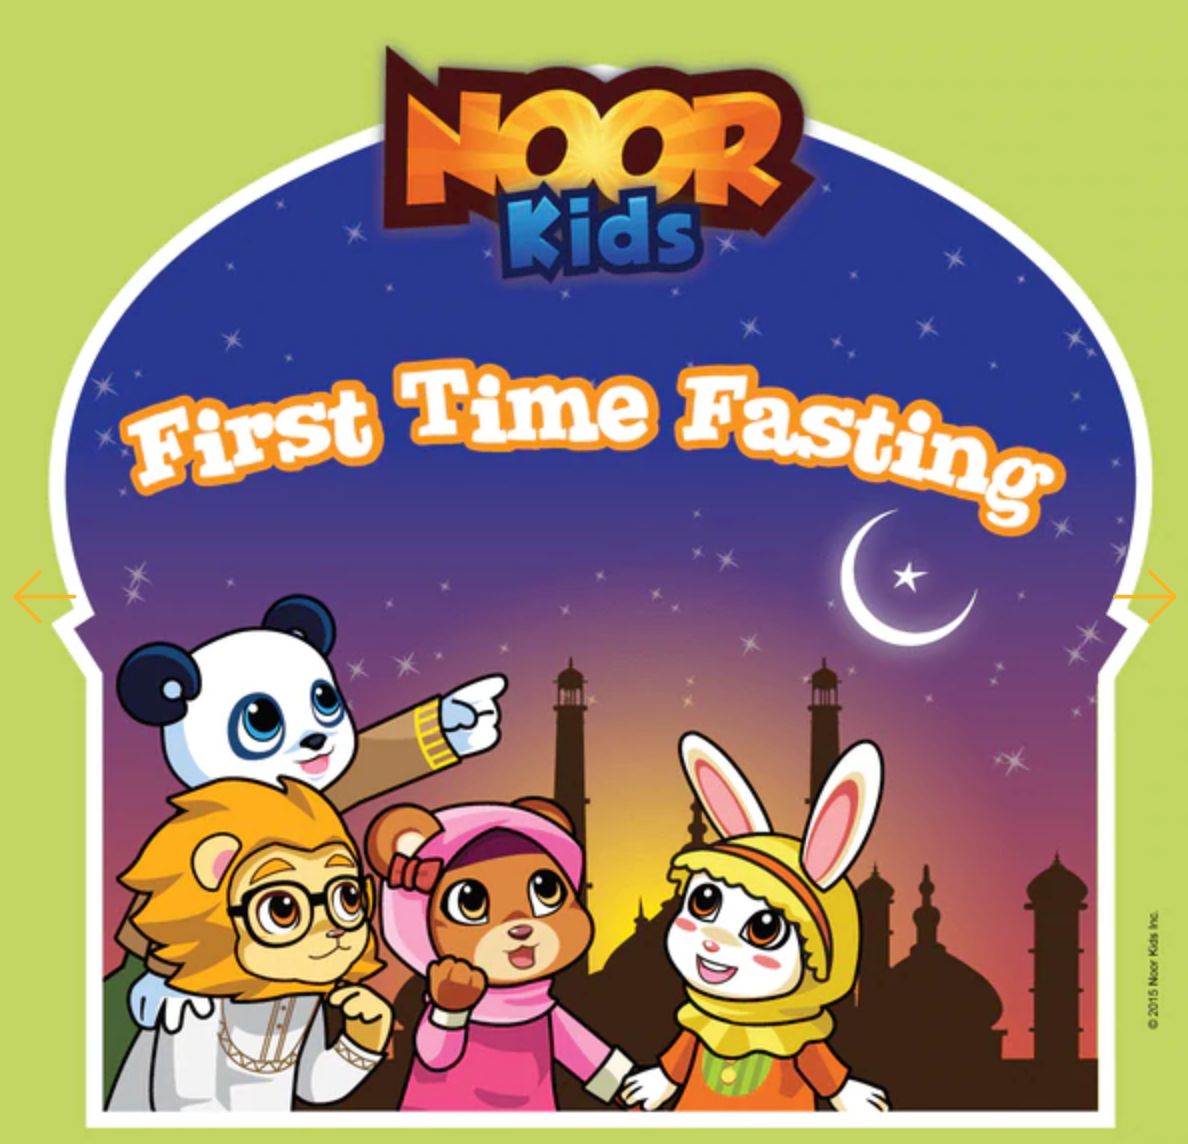 Noor Kids - First Time Fasting